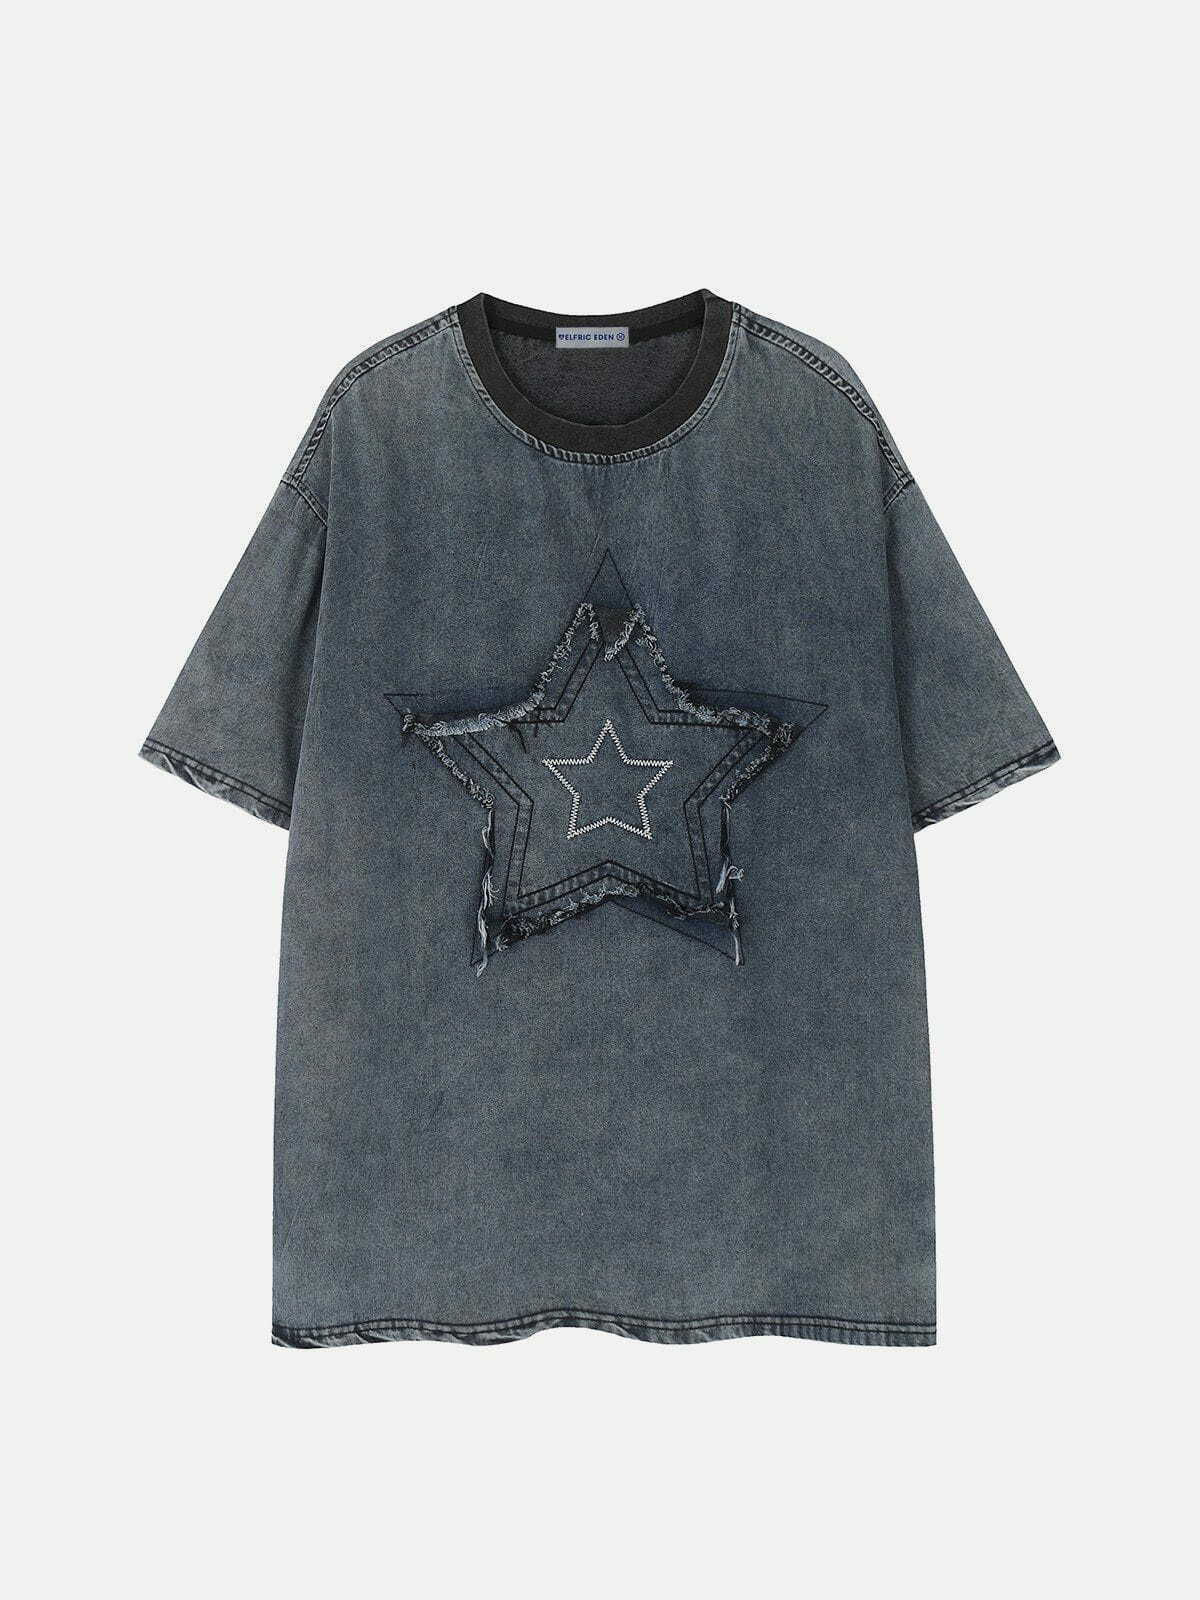 vibrant star washed tee edgy streetwear essential 5418